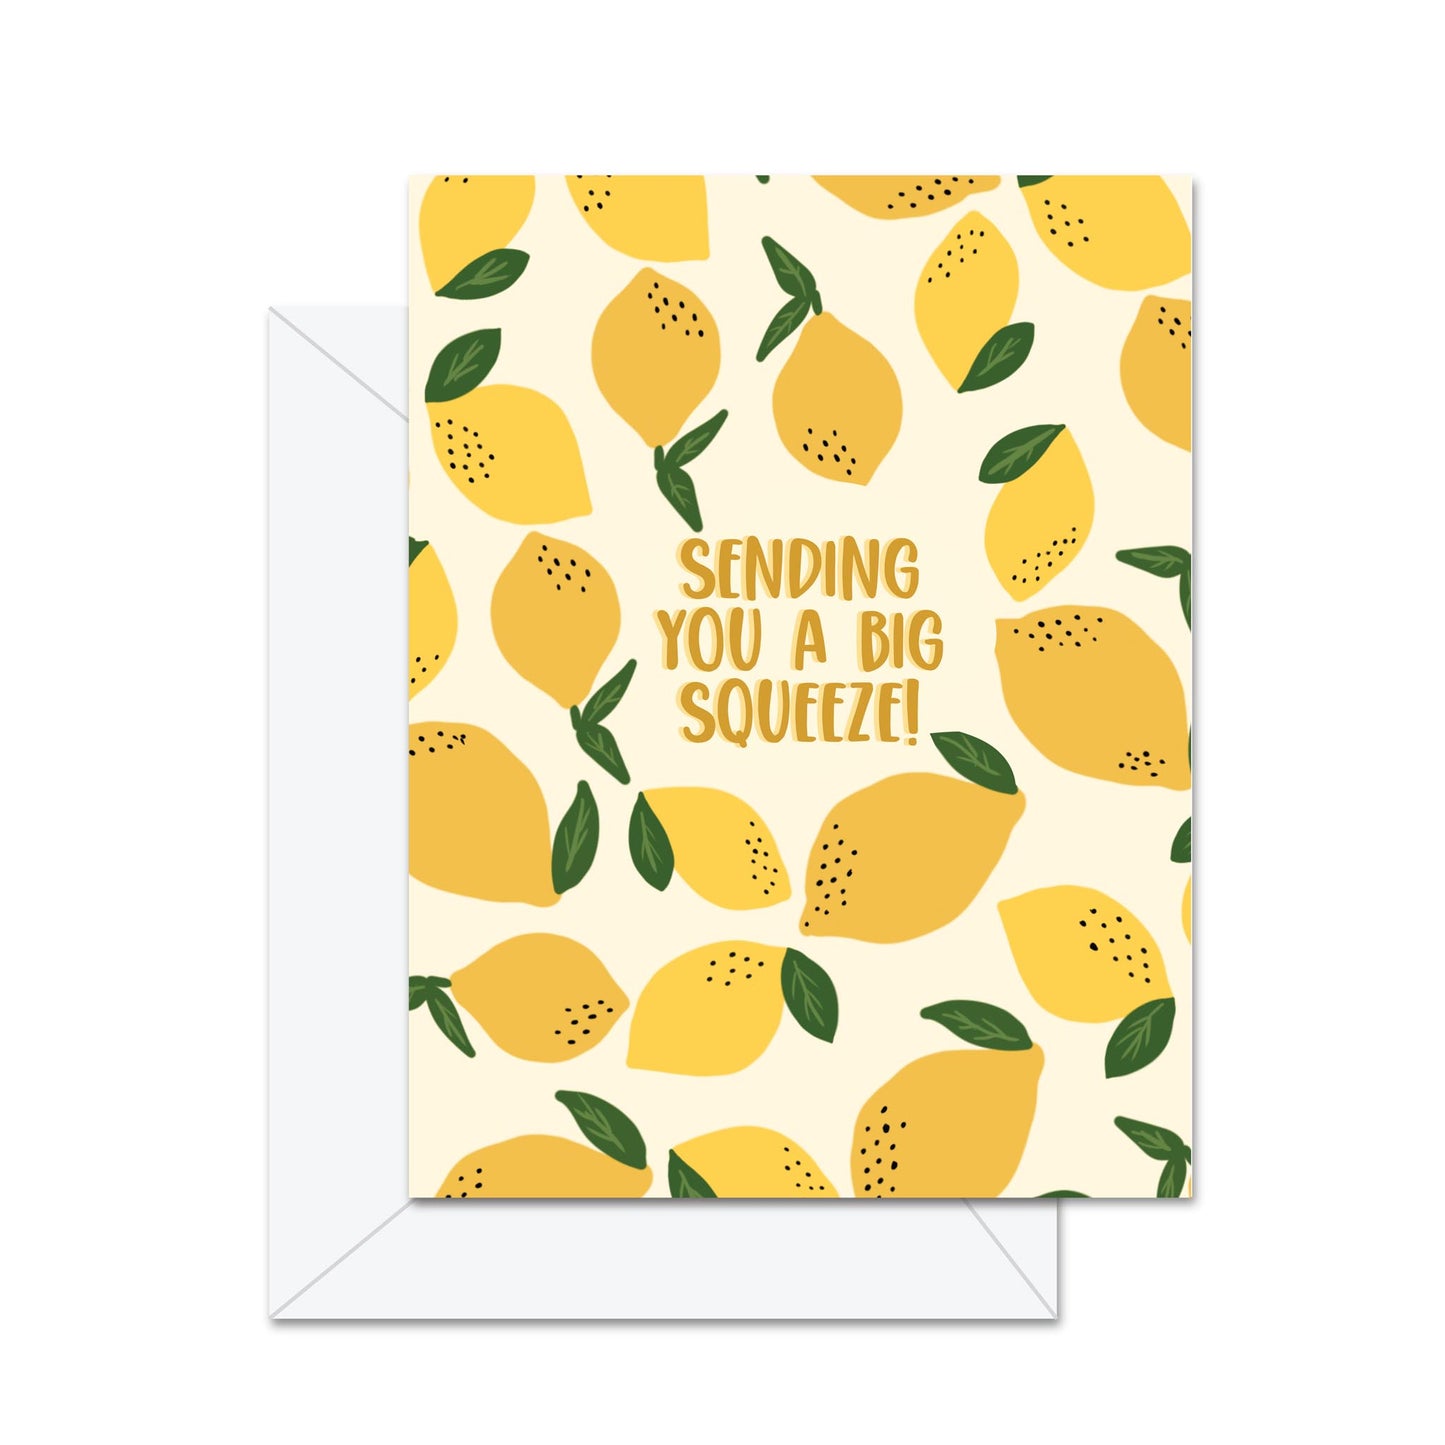 Sending You A Big Squeeze! - Greeting Card